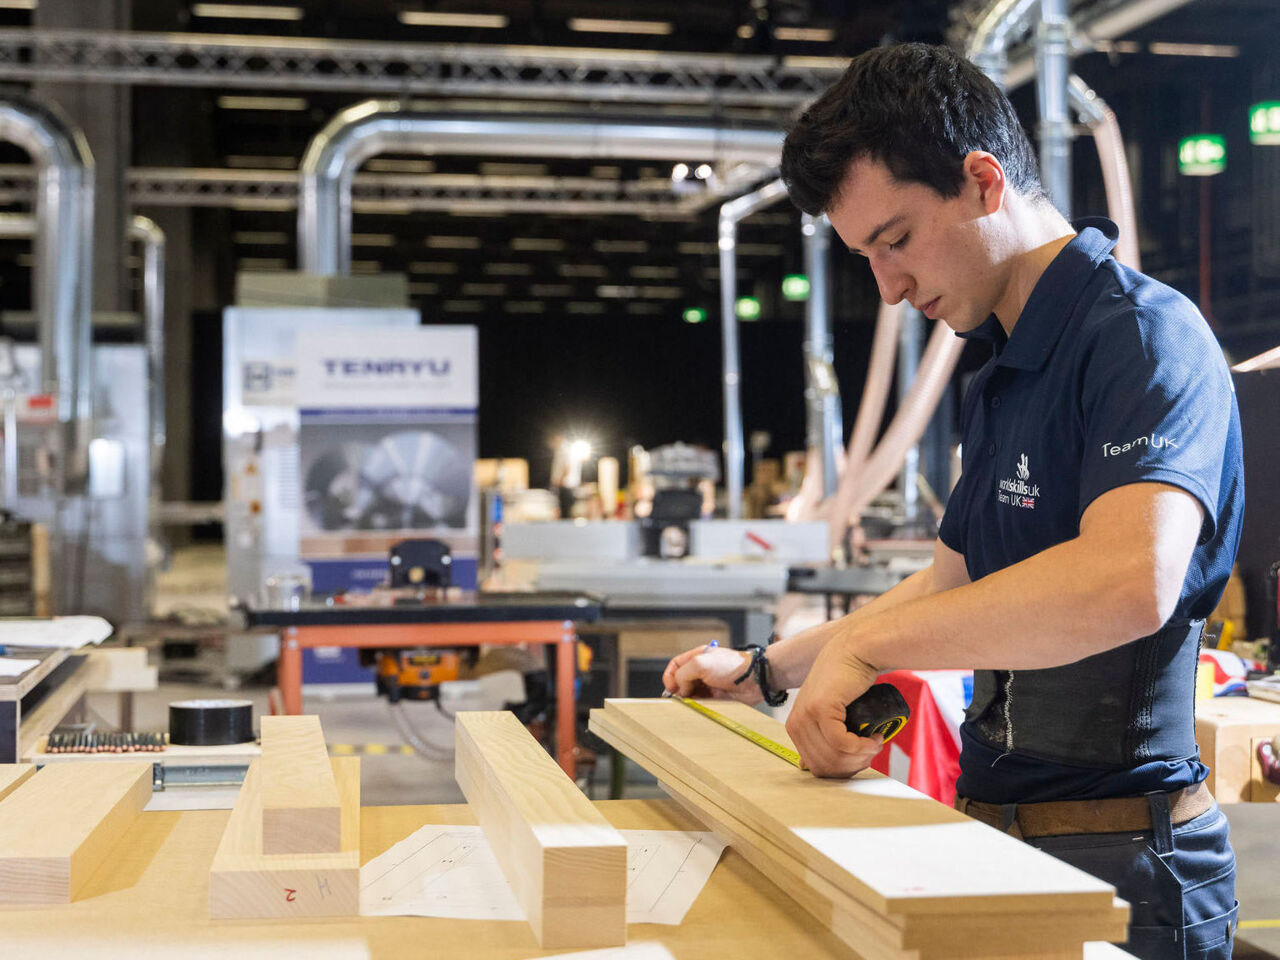 A British competitor in WorldSkills Competition 2022 Special Edition measures wood with a measuring tape at Holz, Switzerland’s woodworking sector trade fair, at Messe Basel, Switzerland from 11 to 14 October.
